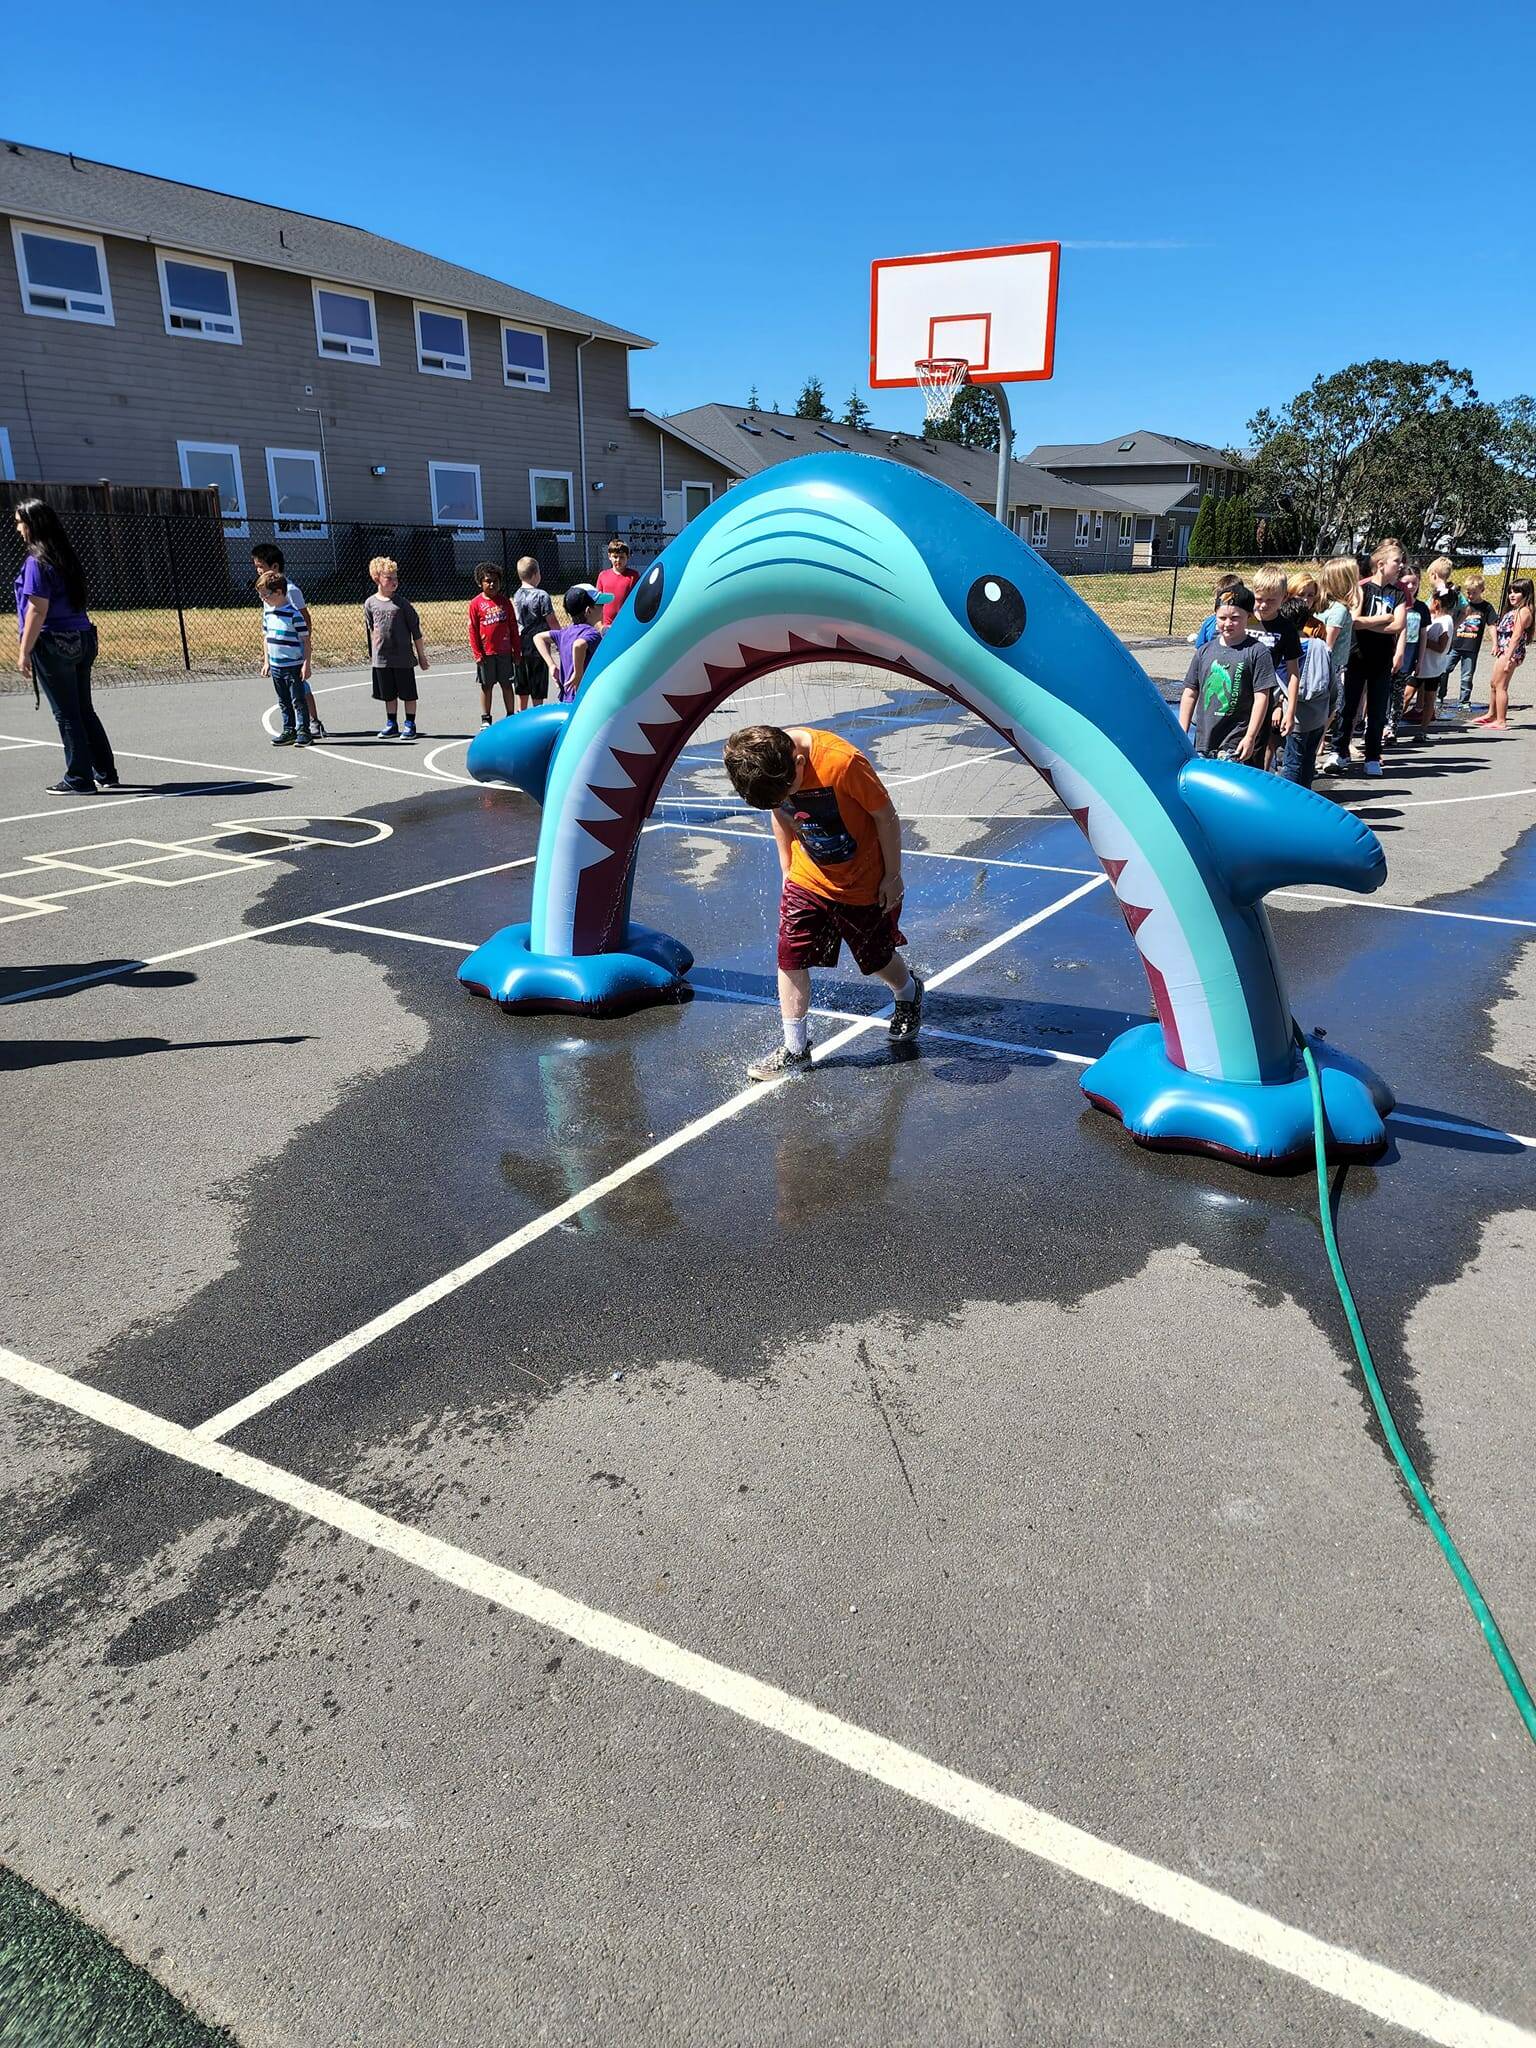 Submitted photo
Club members with the Boys & Girls Club of Sequim stay cool and celebrate Shark Week with an inflatable shark on their playground.